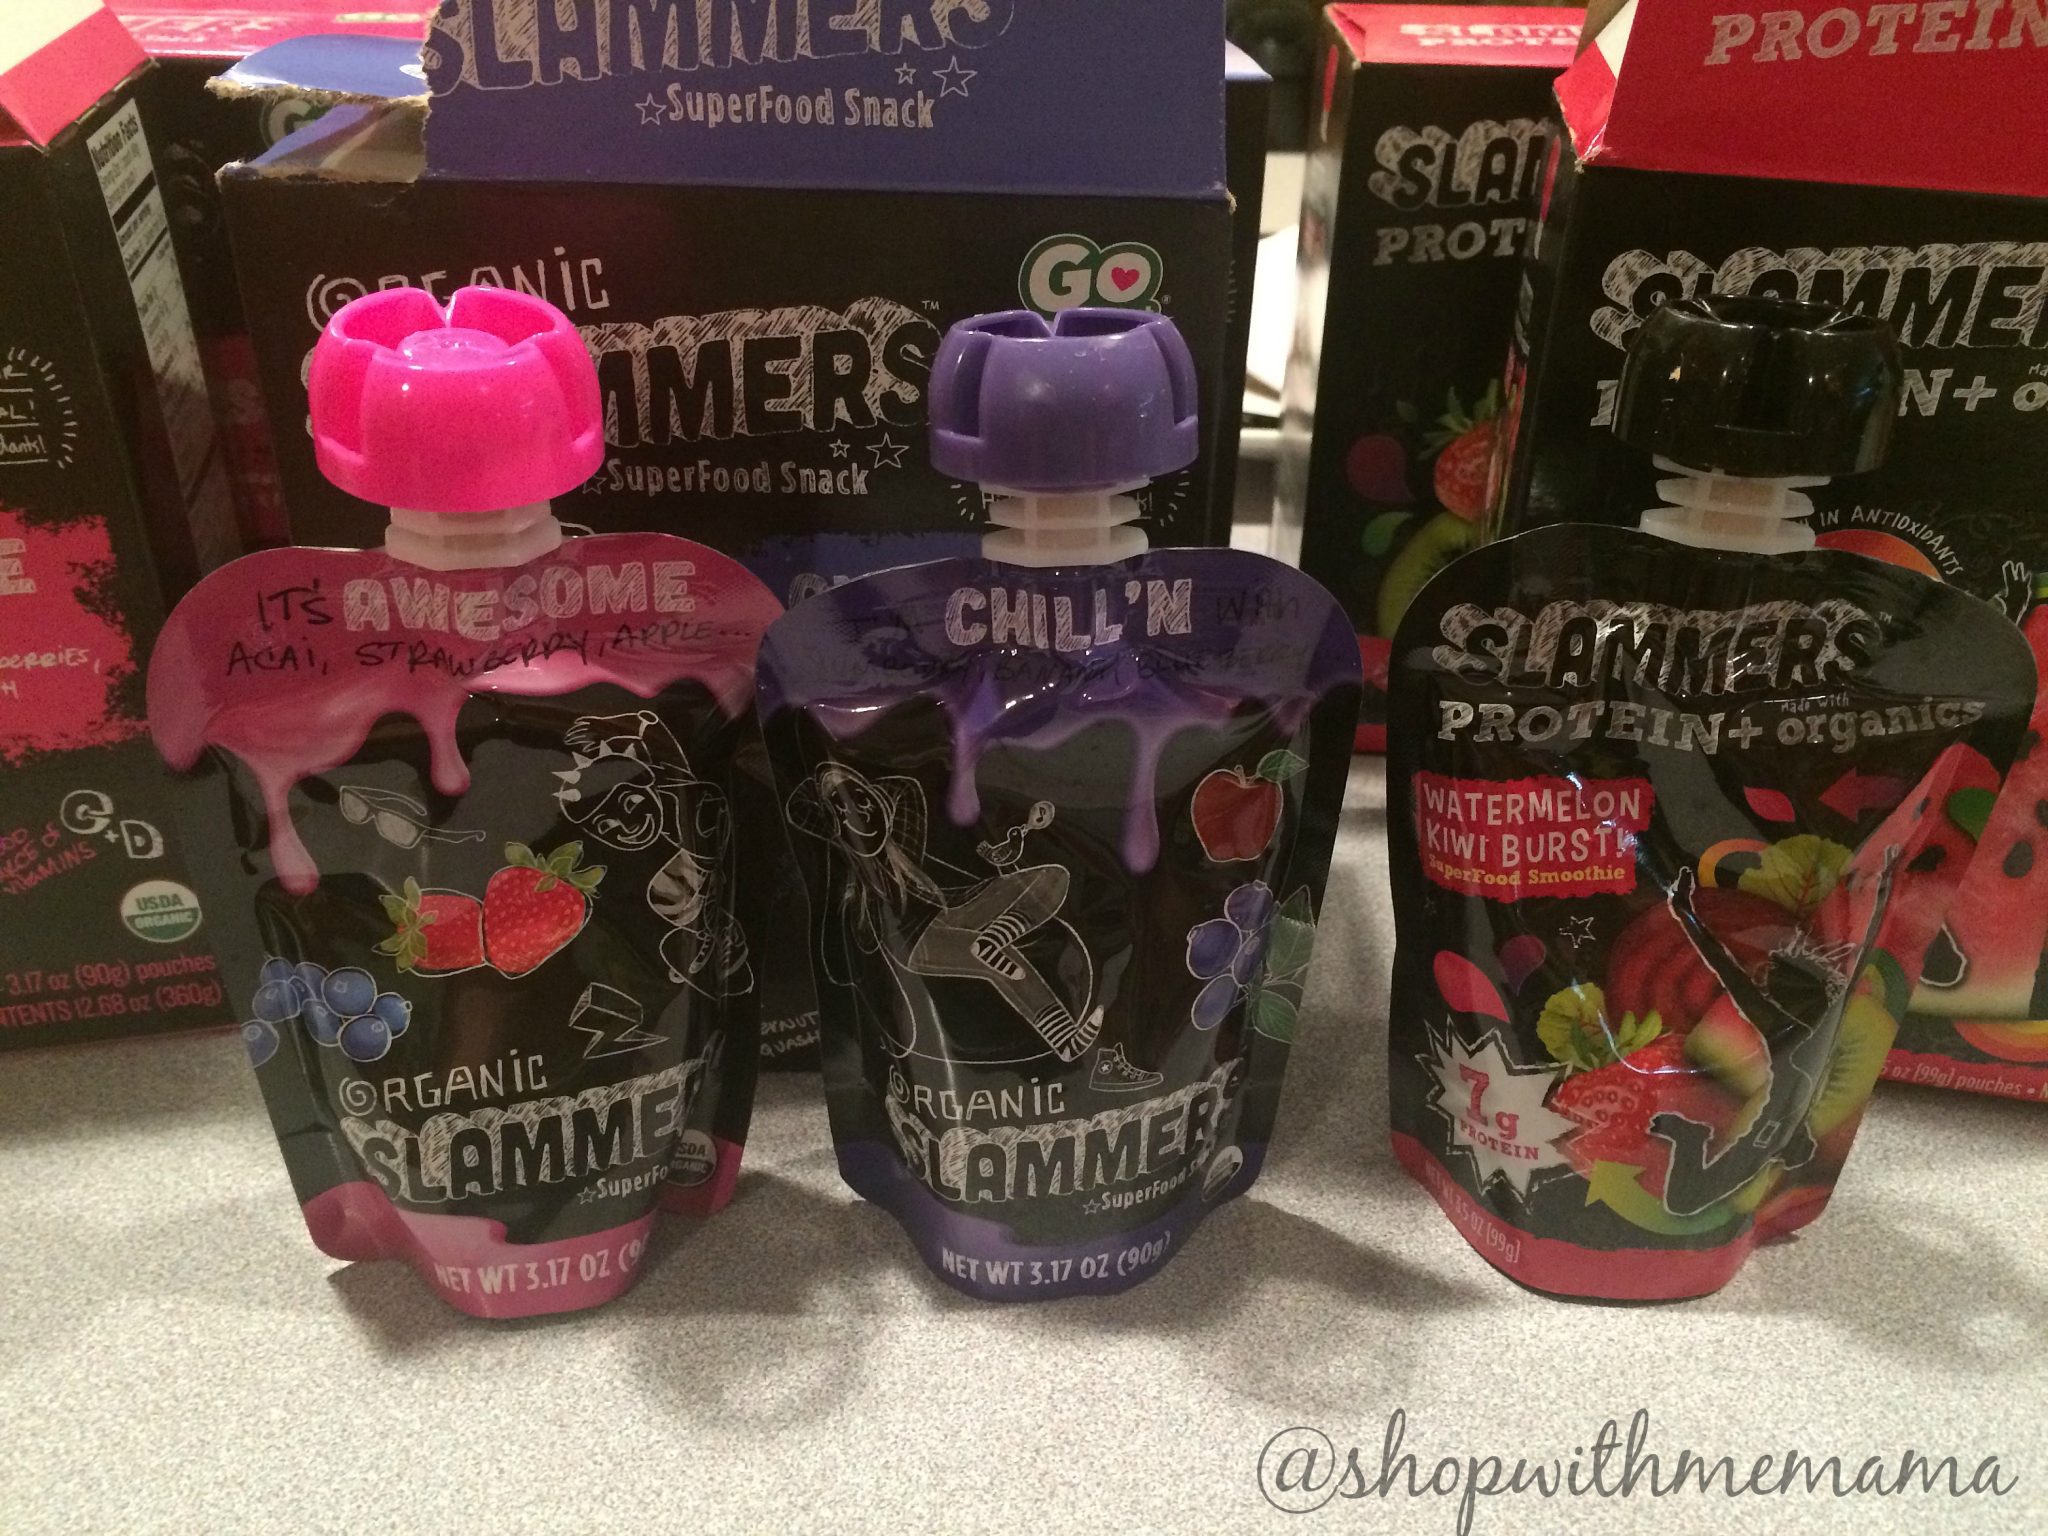 Organic Slammers healthy snack for kids and adults giveaway revivew